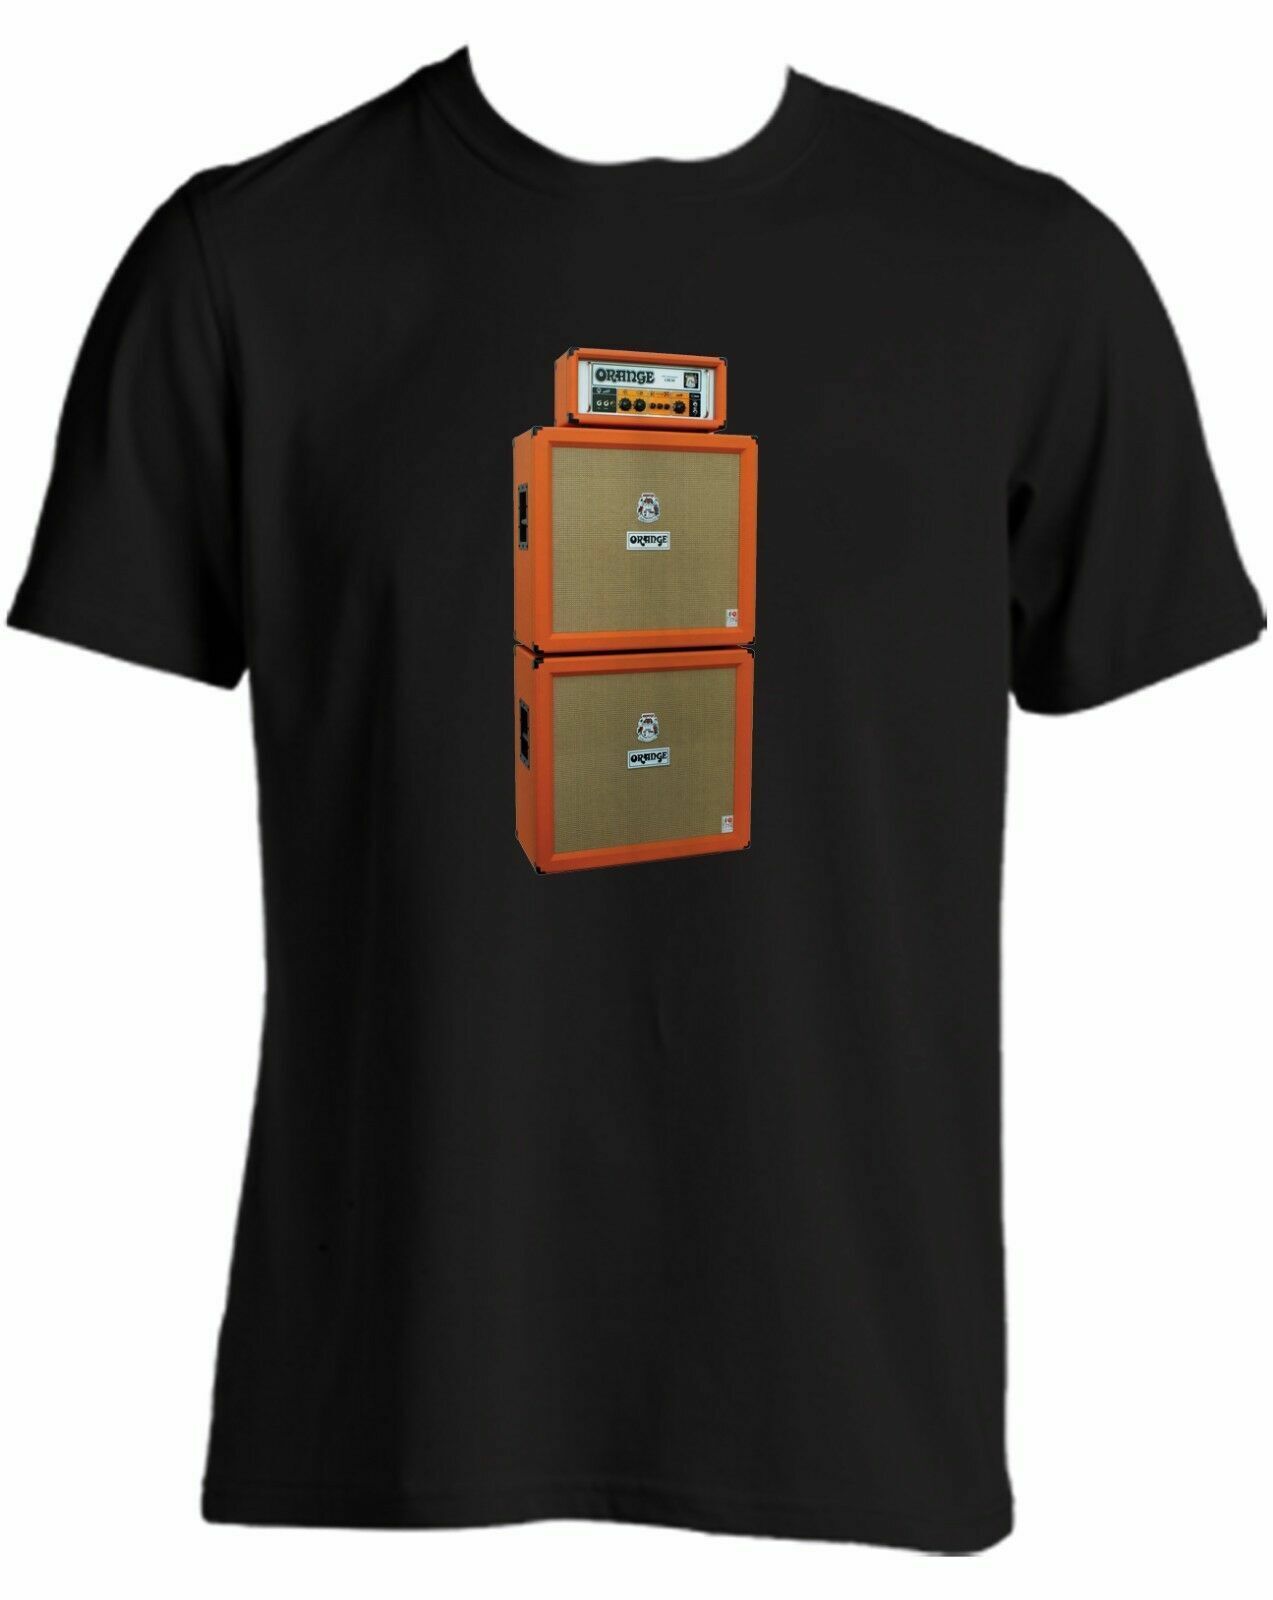 FULL STACK AWESOME TUBE AMPLIFIER ORANGE OR50 T-SHIRT IN 6 COLORS!